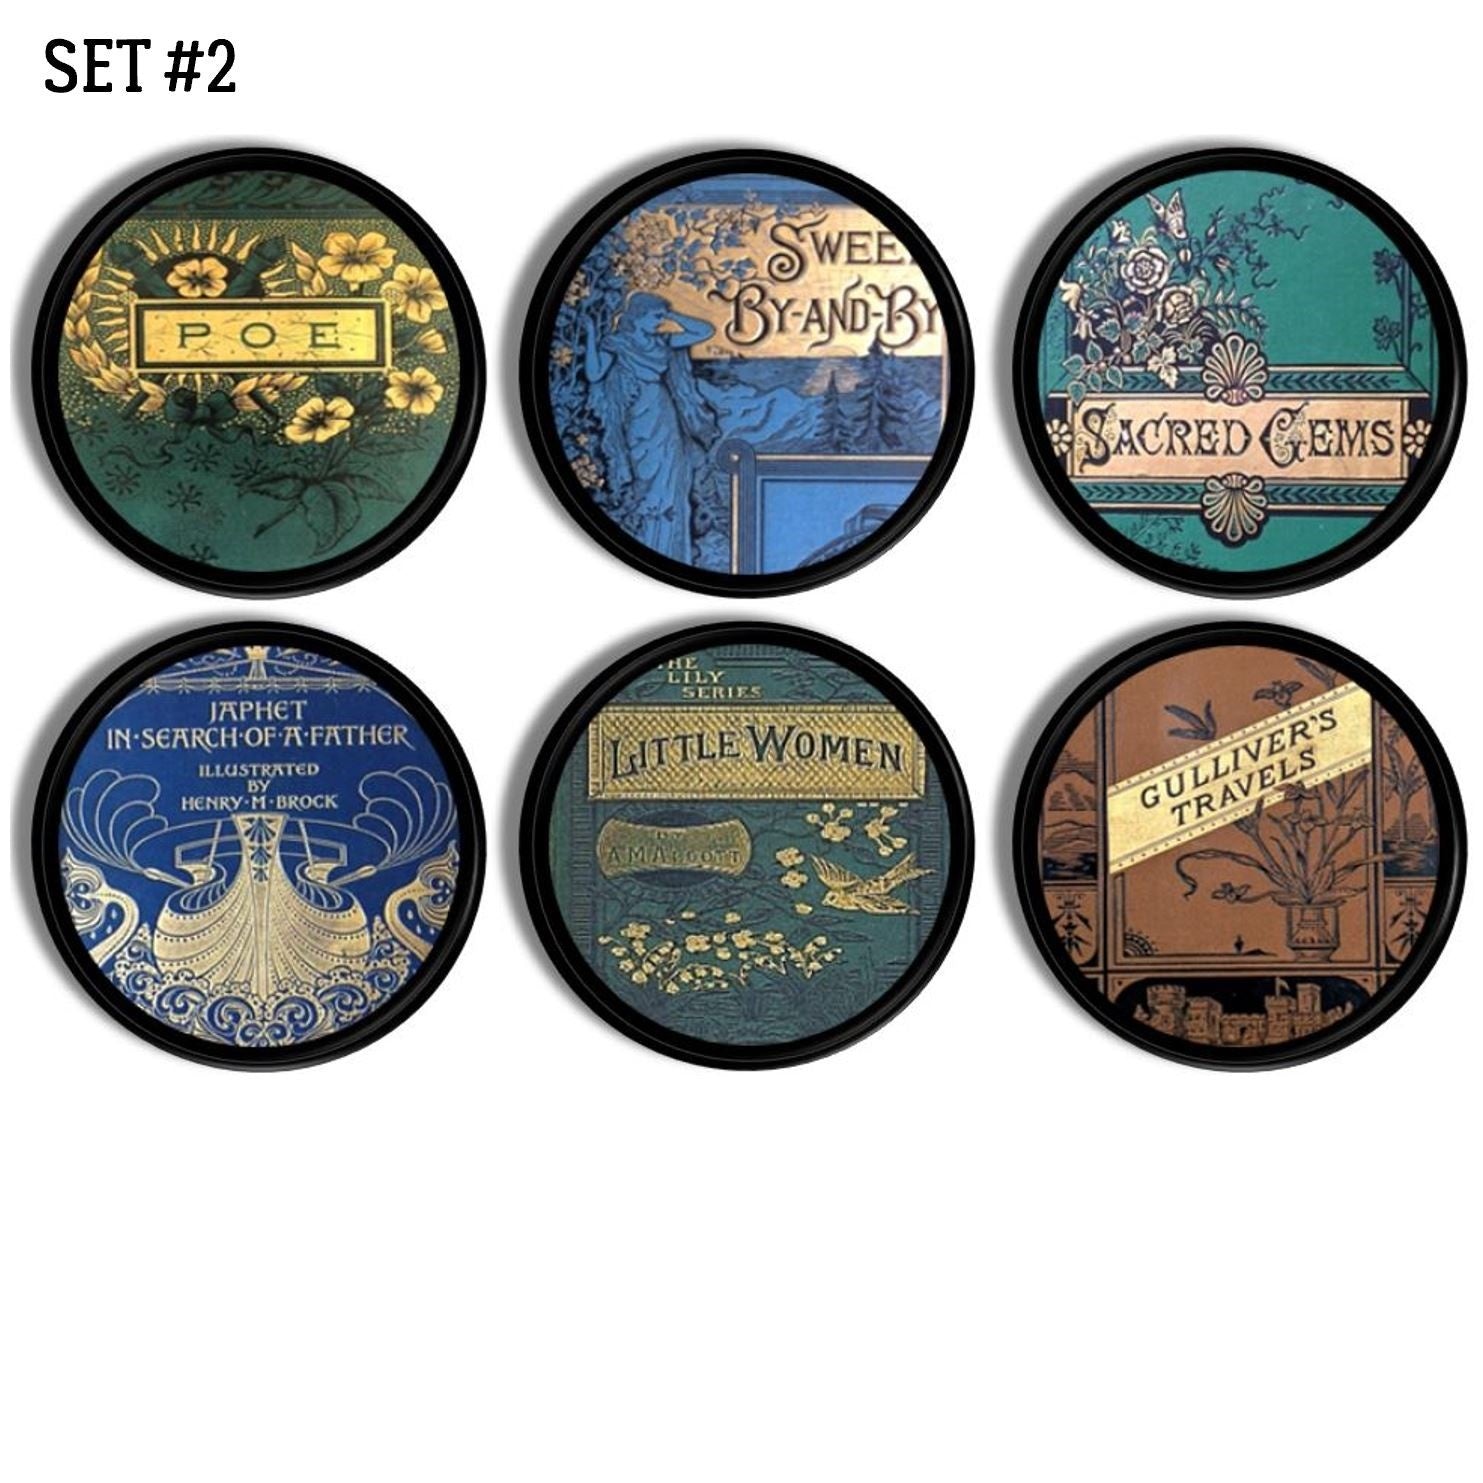 6 decorative knob hardware set in classic literature book cover art. Collection of works such as Poe, Littel Women, Gulliver&#39;s Travels and more.